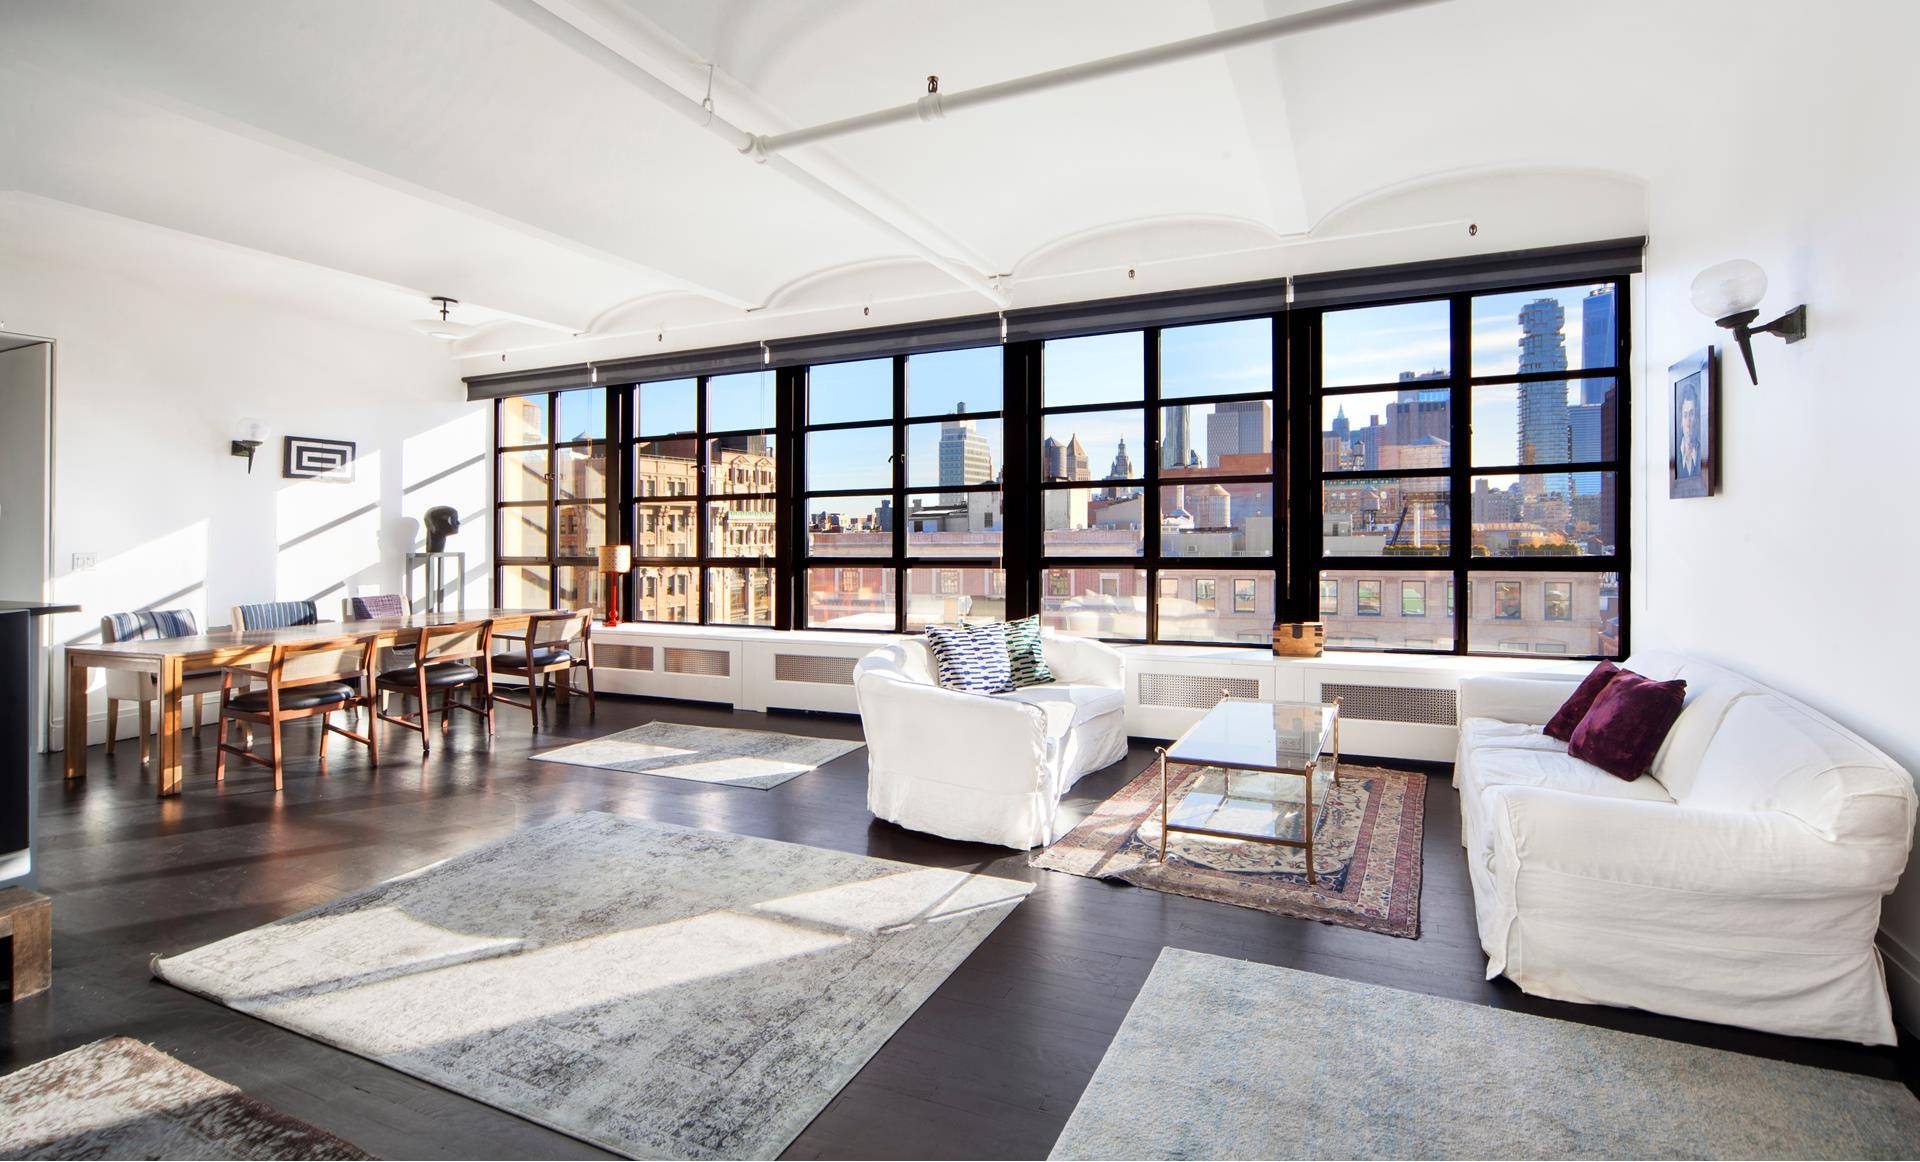 Extraordinary, sunny and gracious characterize this top floor iconic SoHo loft dominated by exceptional views of downtown Manhattan seen through a row of beautifully framed casement windows.